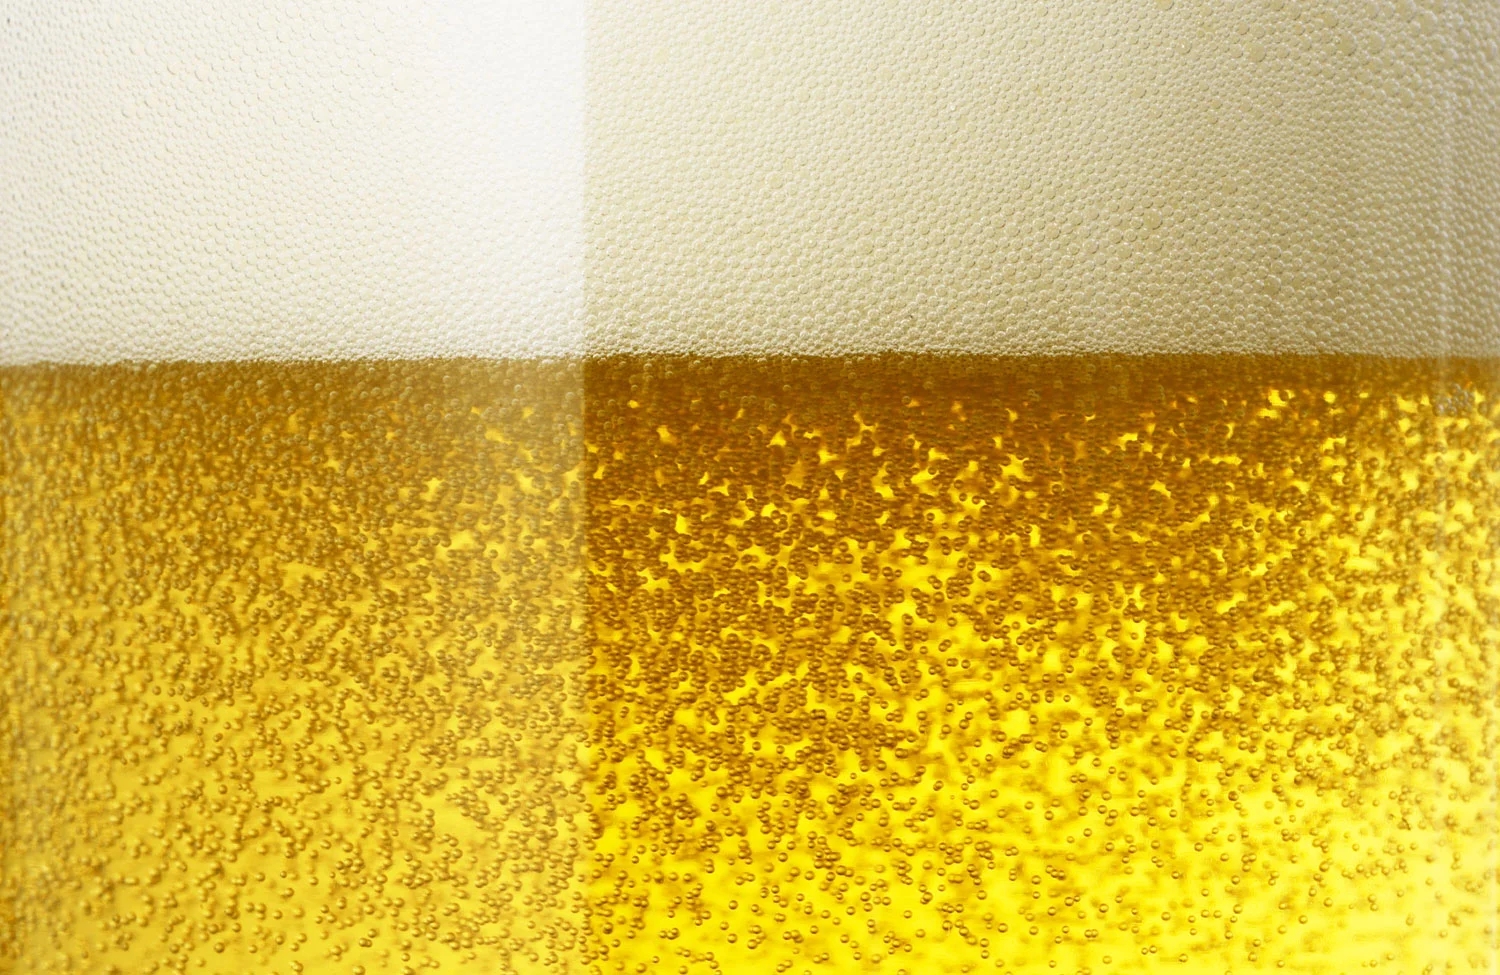 Ways to make your beer clearer